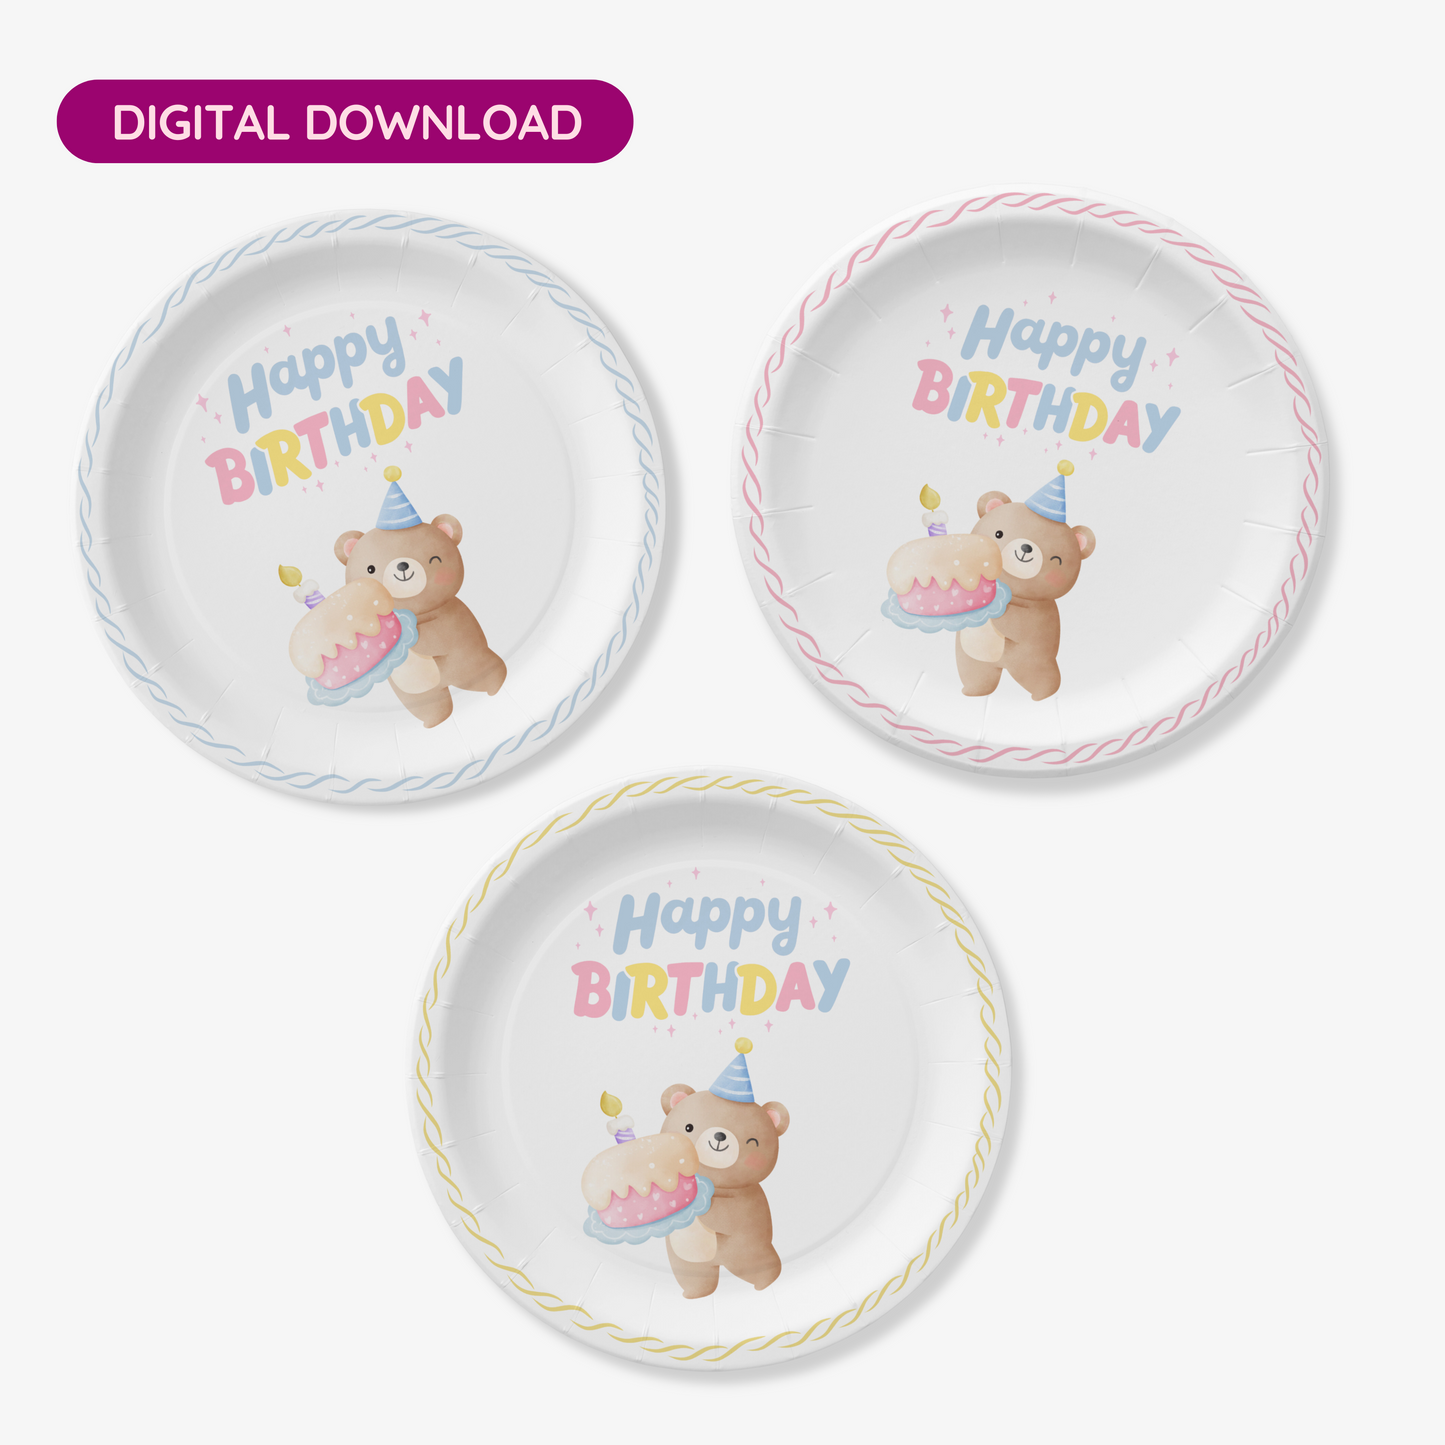 Teddy Bear's Happy Birthday Party Paper Plates (DIGITAL DOWNLOAD)